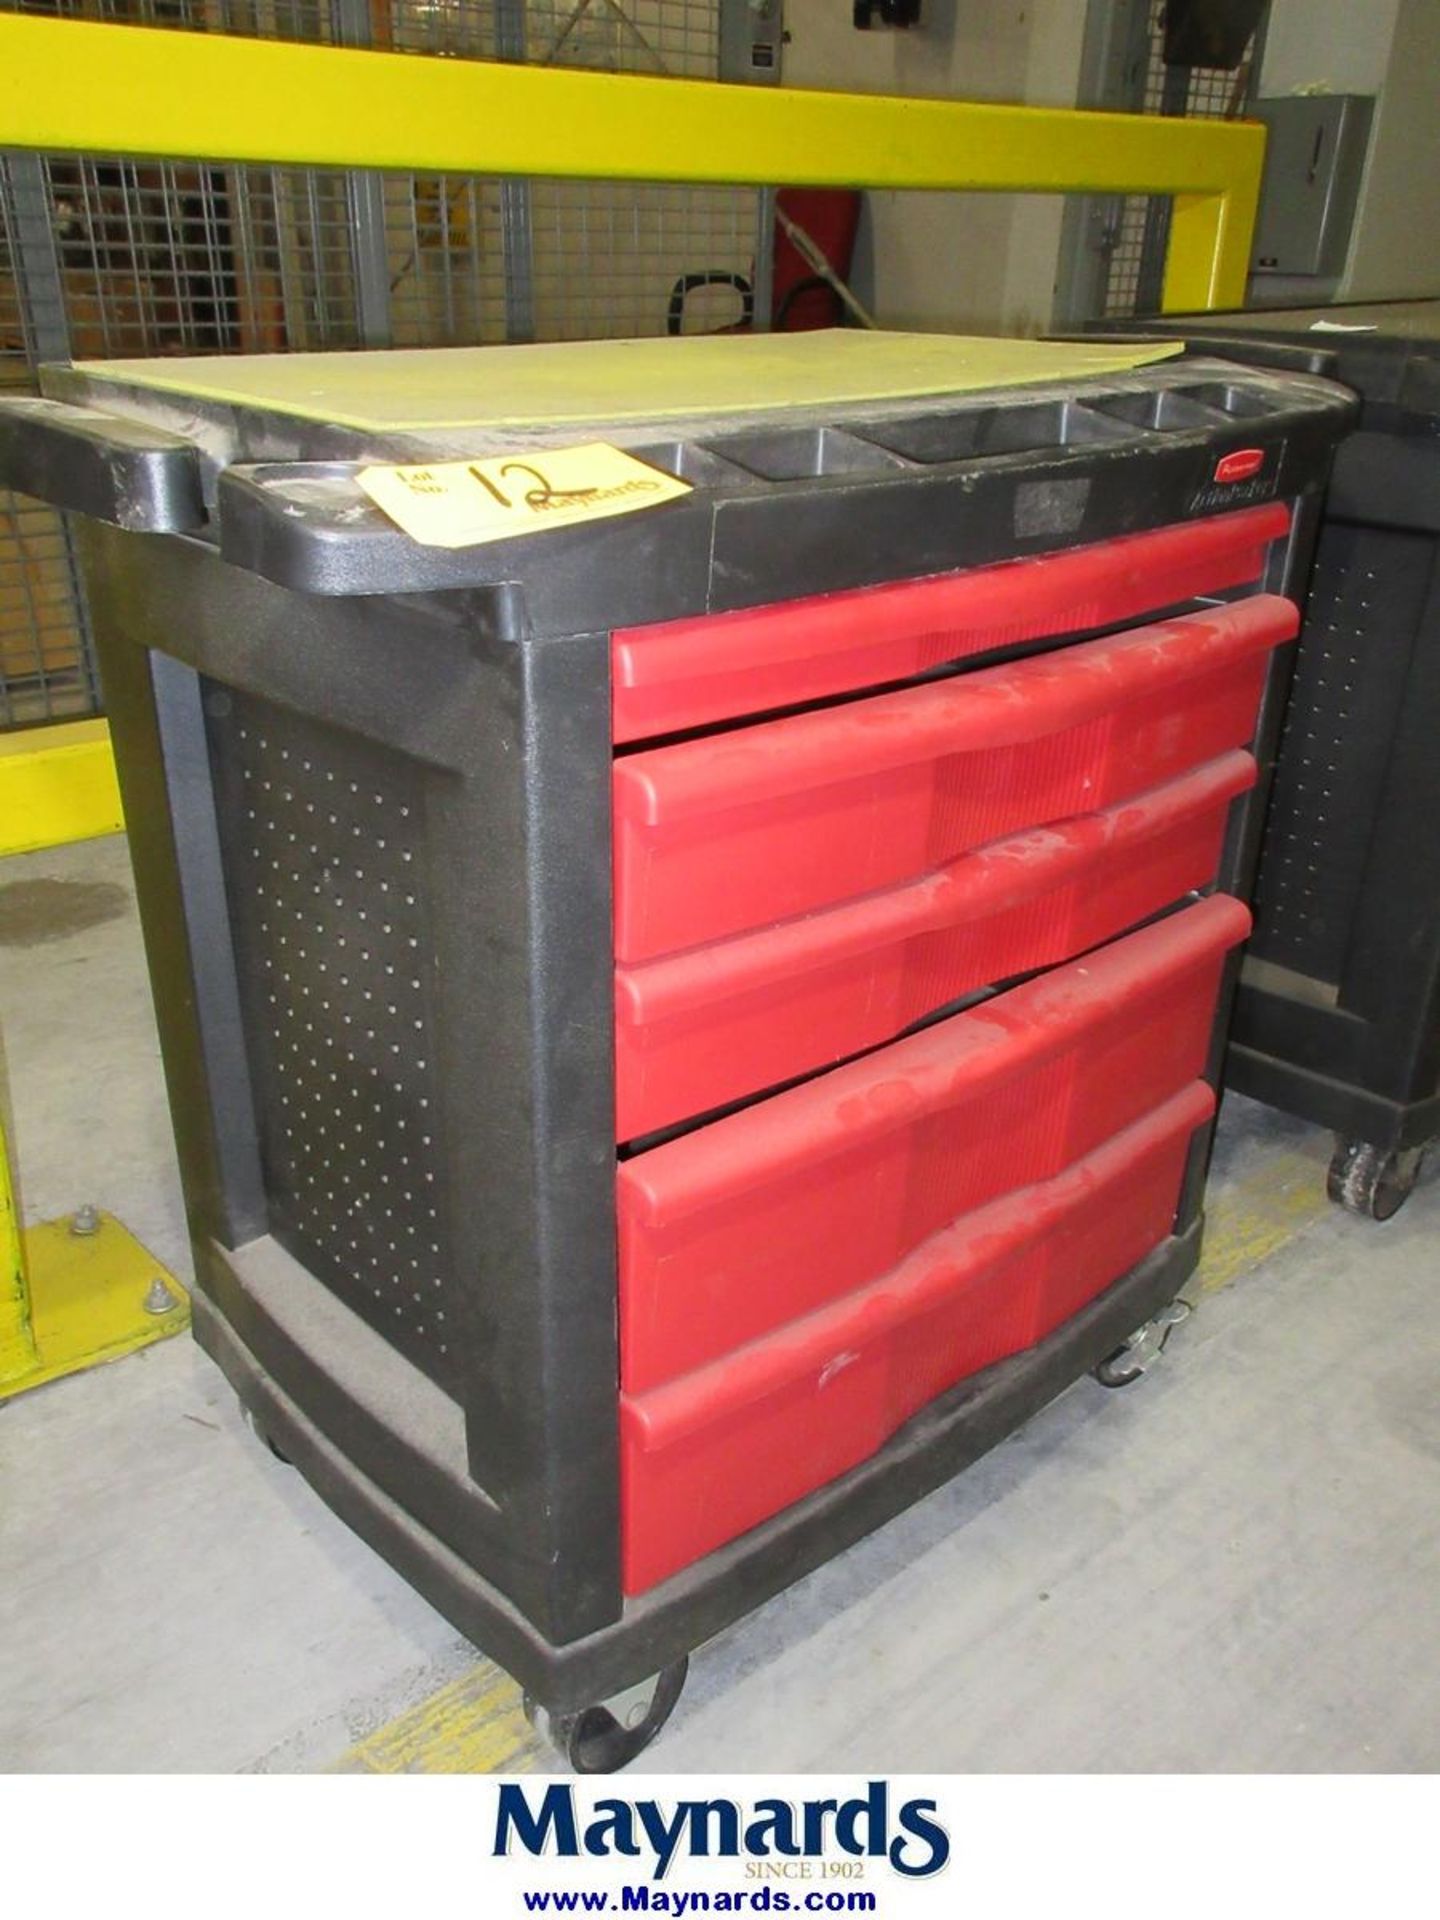 Rubbermaid ActionPacker 24" 5-Drawer Rolling Toolbox - Image 2 of 2